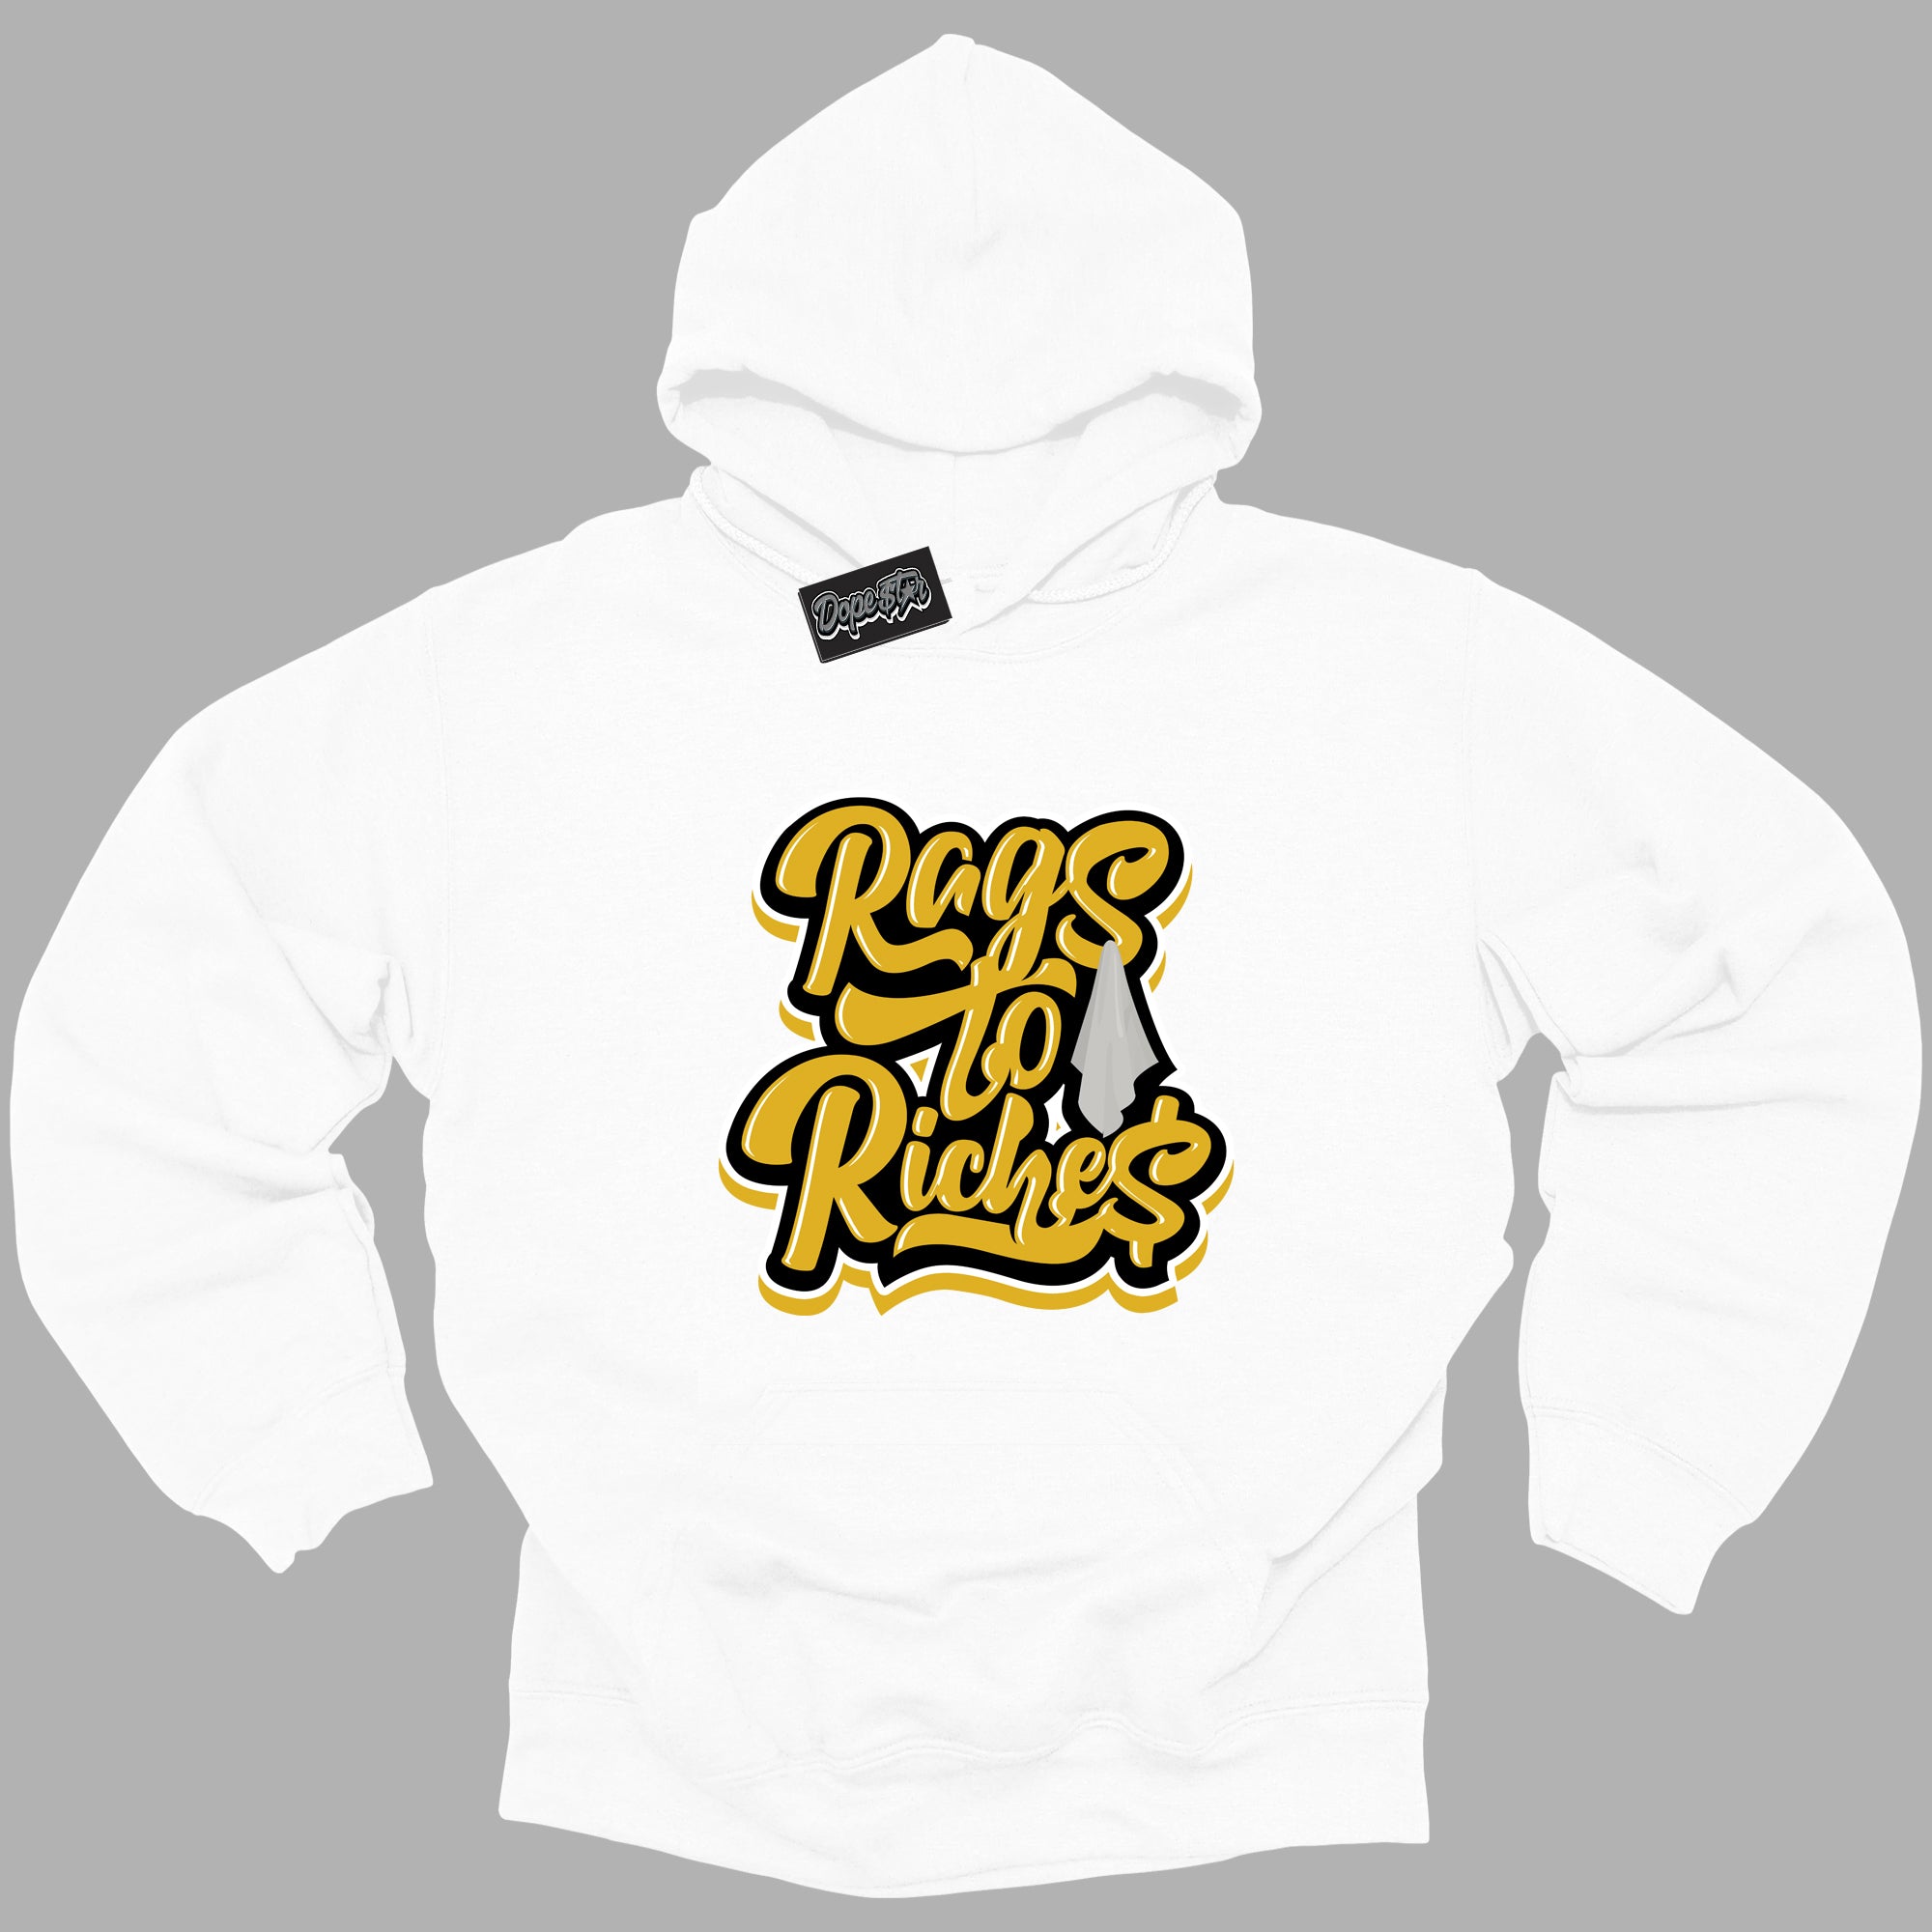 Cool White Hoodie with “ Rags To Riches ”  design that Perfectly Matches Yellow Ochre 6s Sneakers.